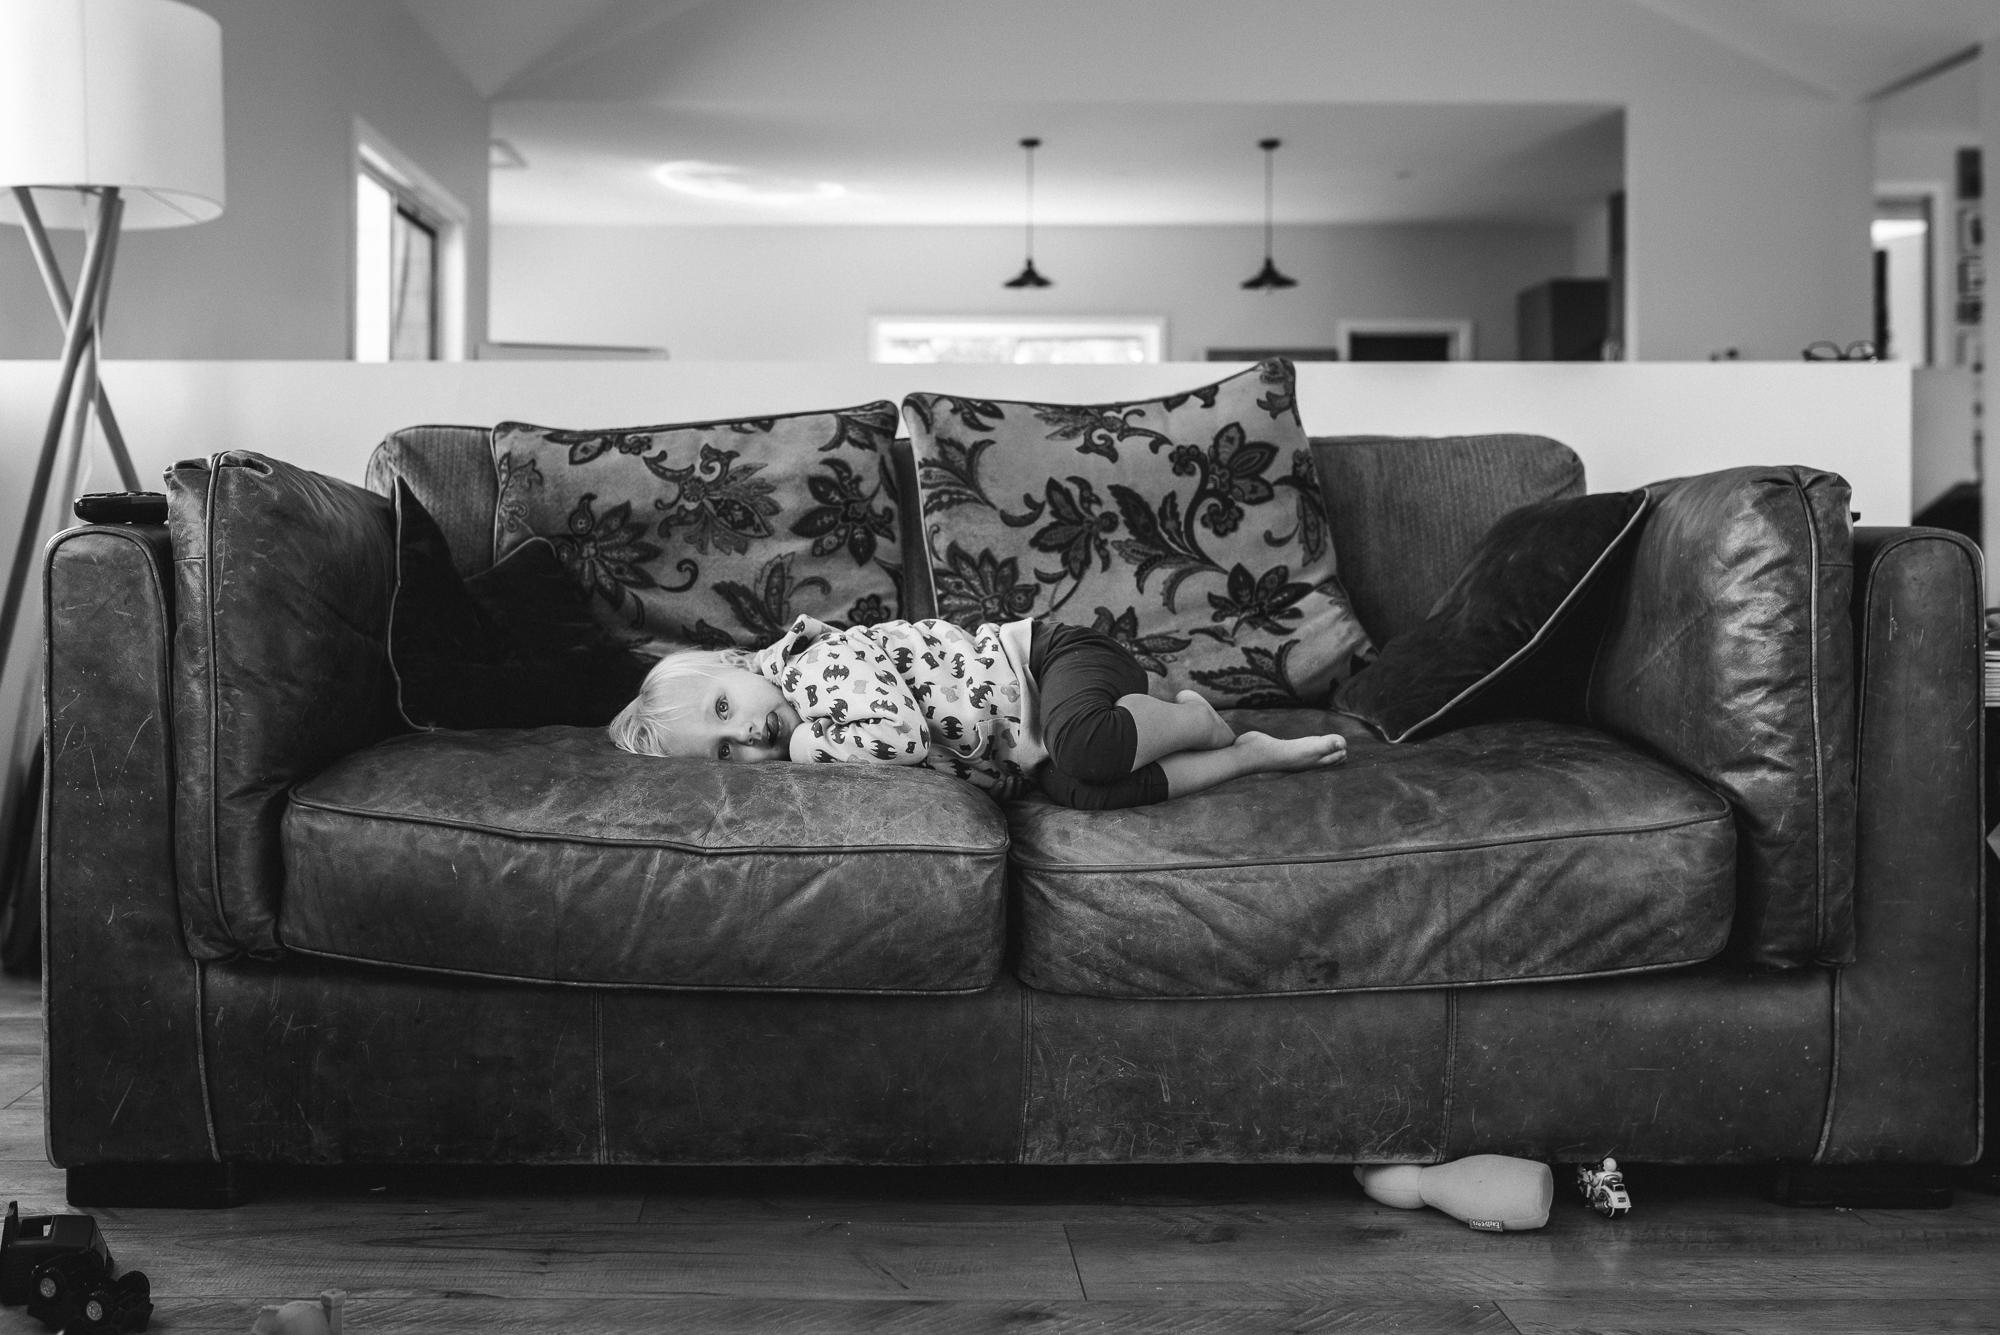 child asleep on couch - Documentary Family Photography